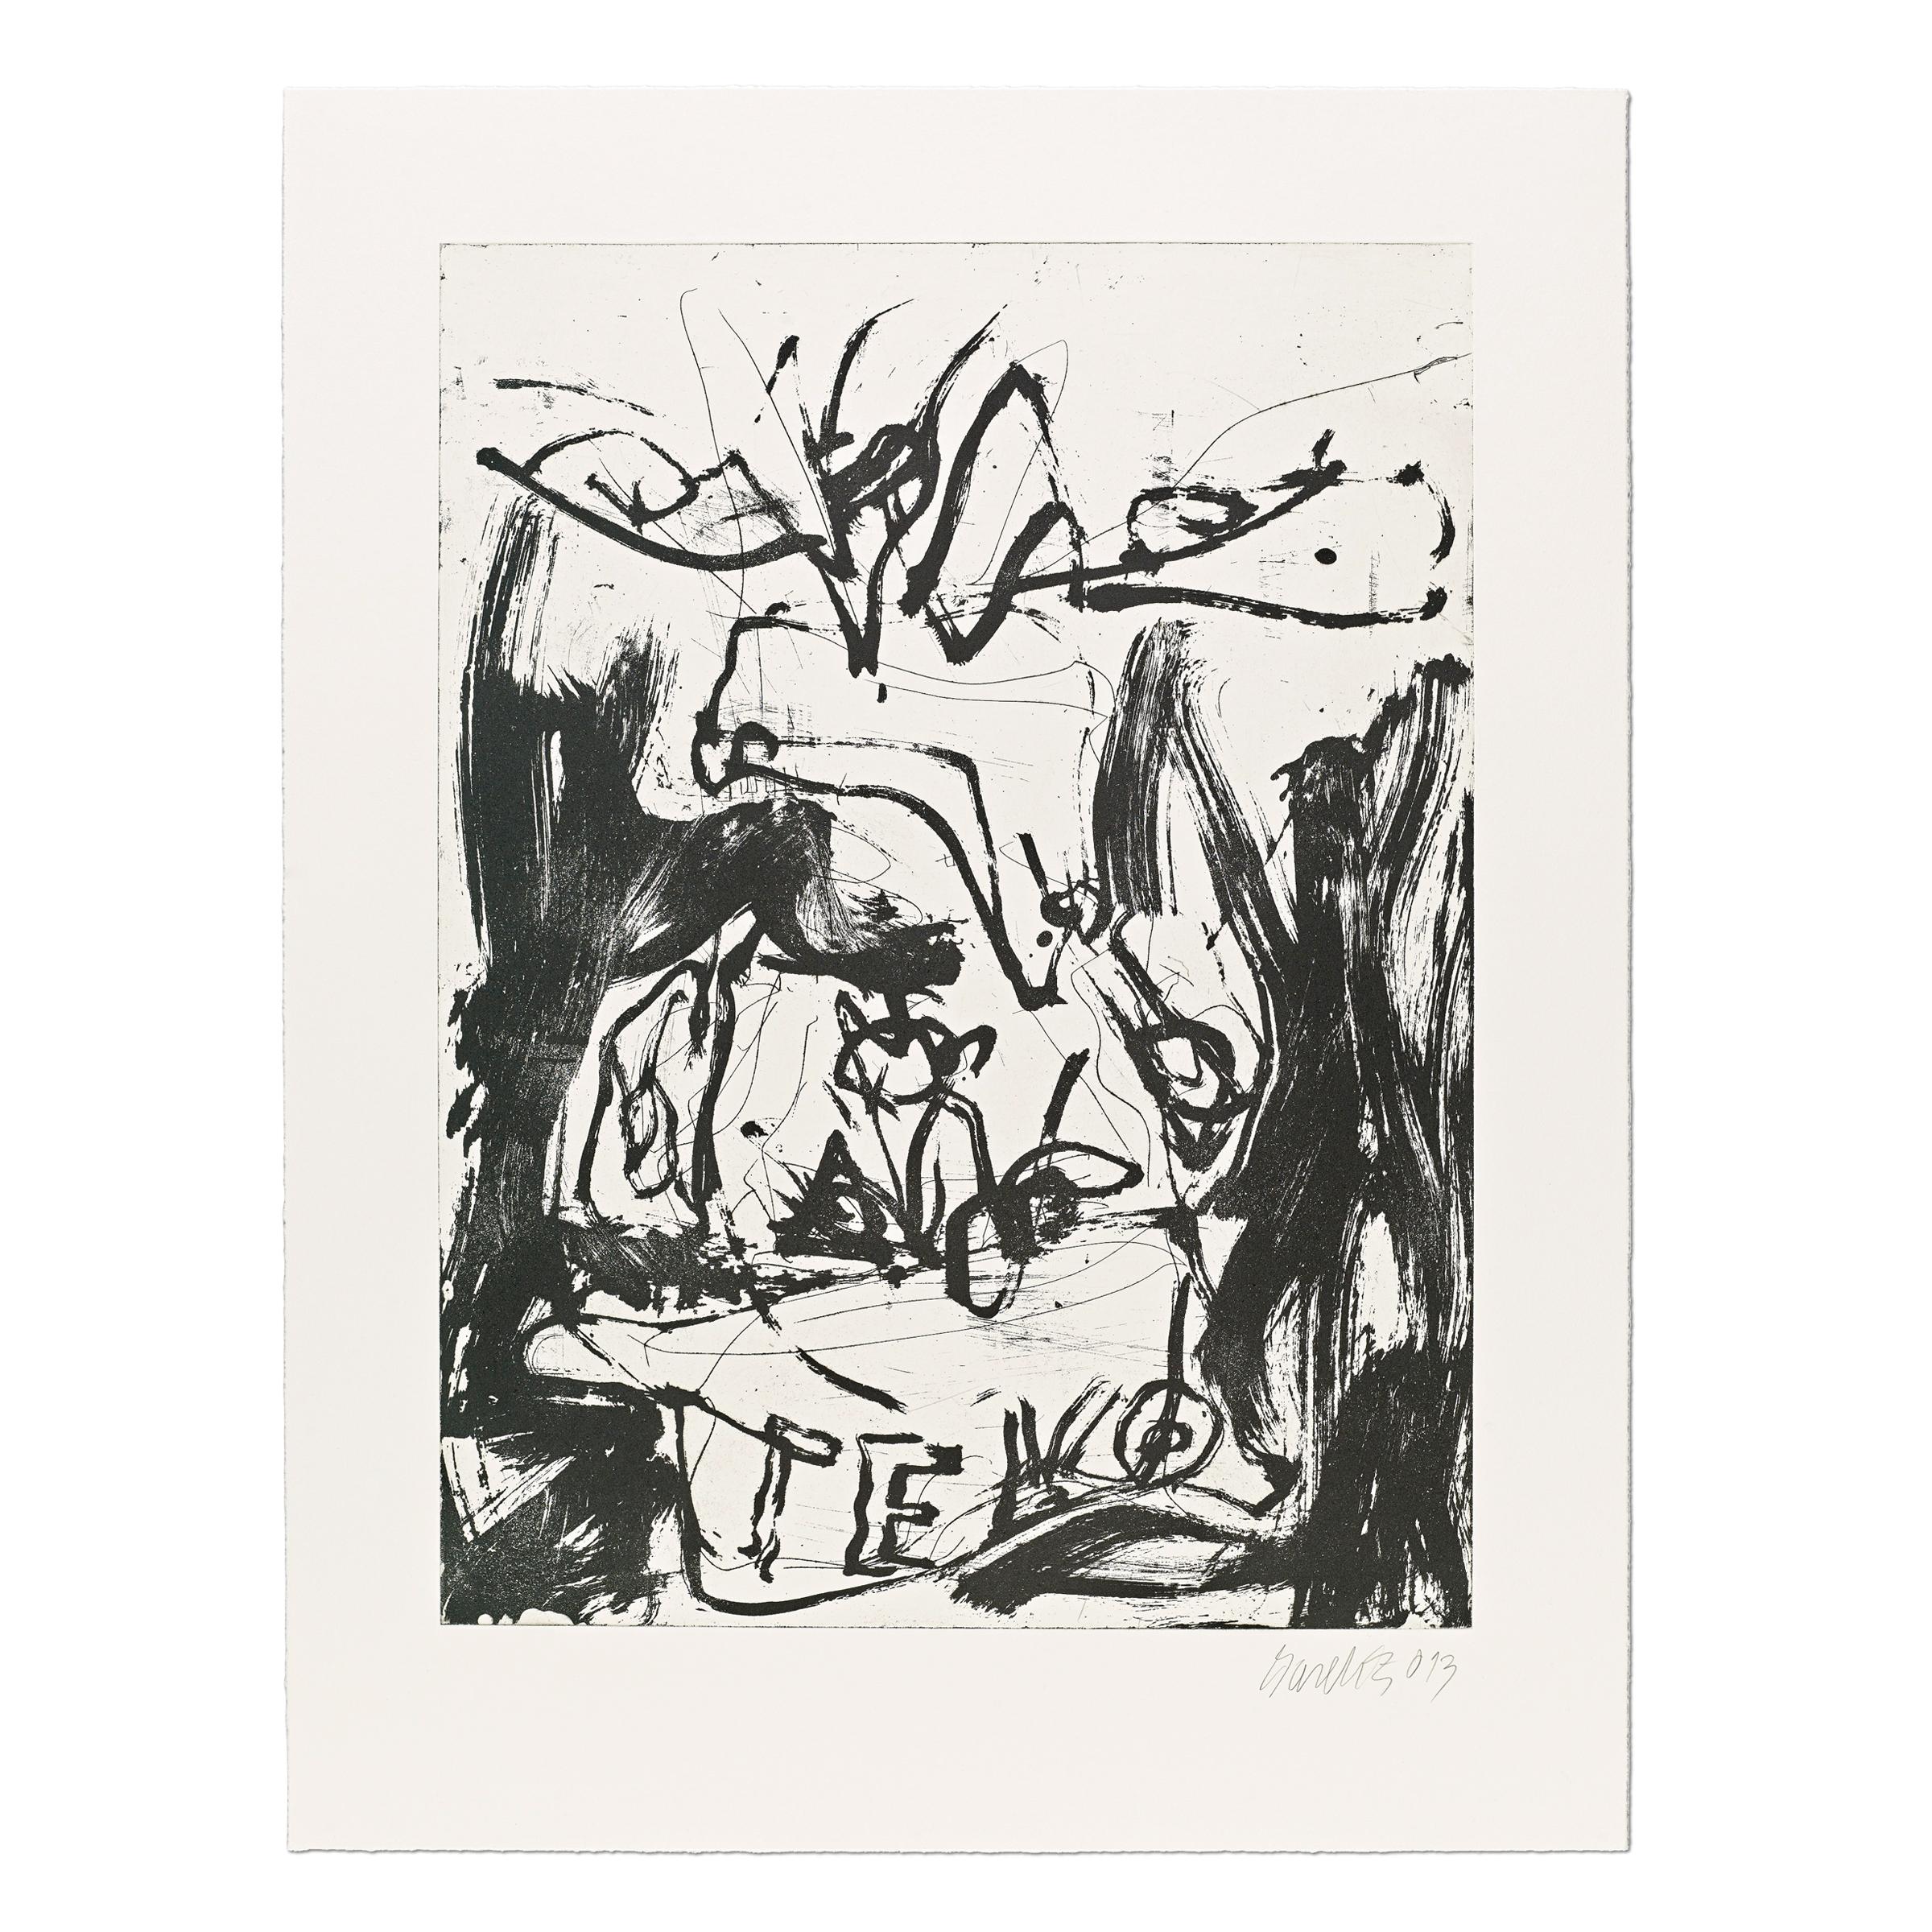 Georg Baselitz (German, b. 1938)
Untitled #4 (from Farewell Bill), 2013
Medium: Aquatint and line etching on wove paper
Dimensions: 85.1 x 64.9 cm
Edition of 15: Hand-signed and numbered
Condition: Excellent